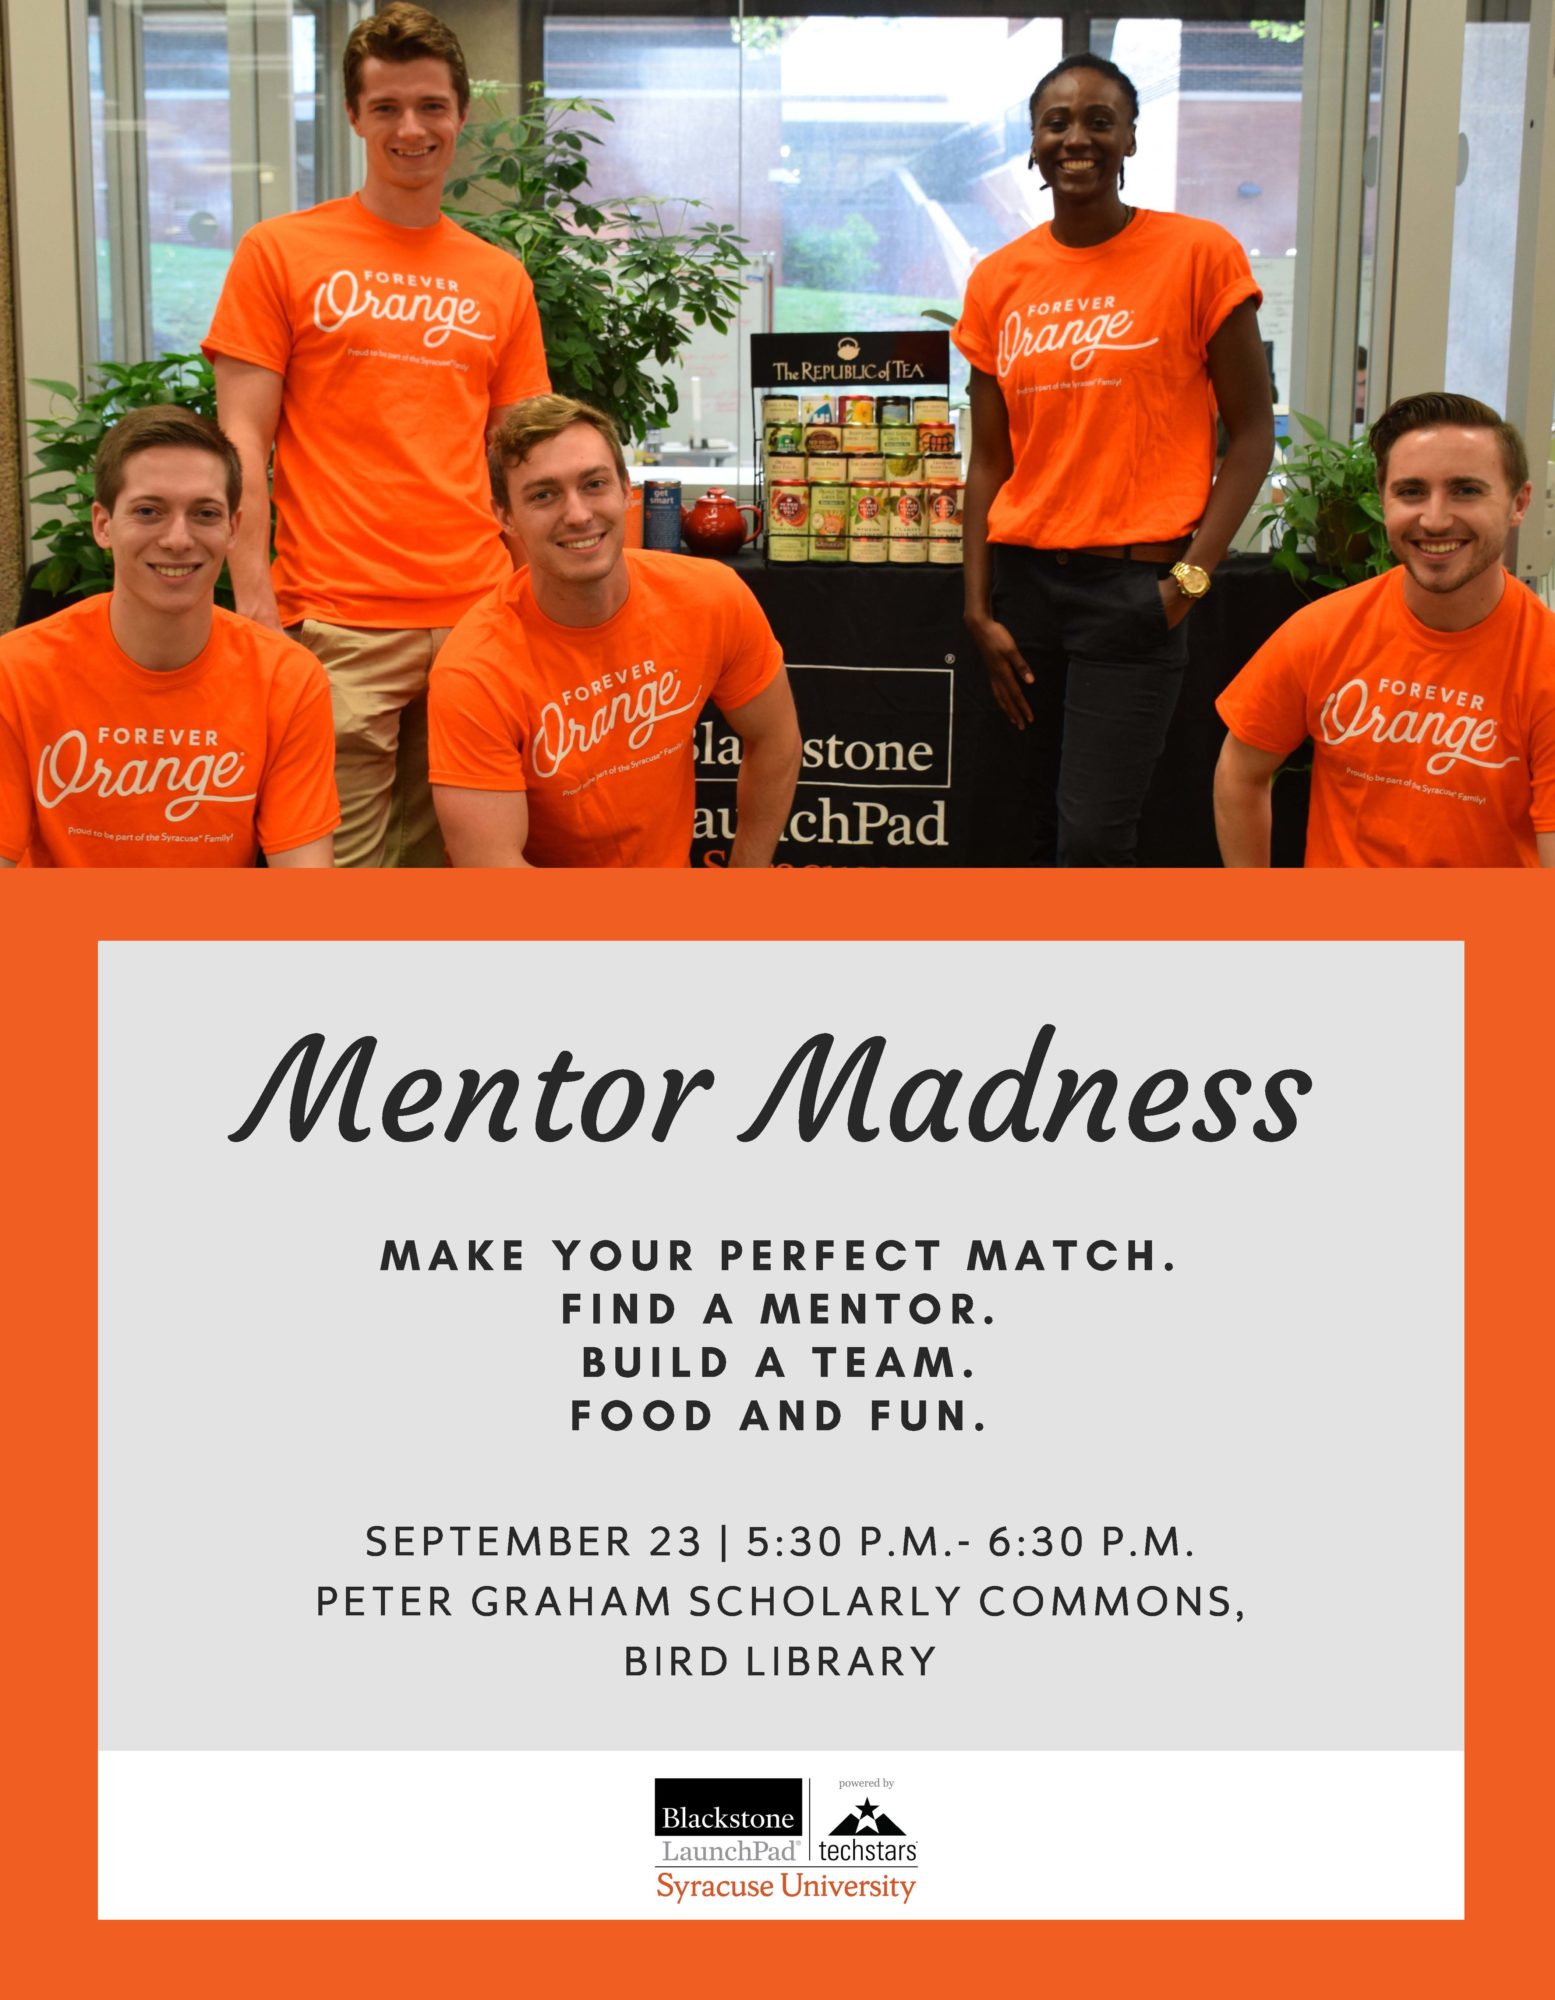 Mentor madness poster